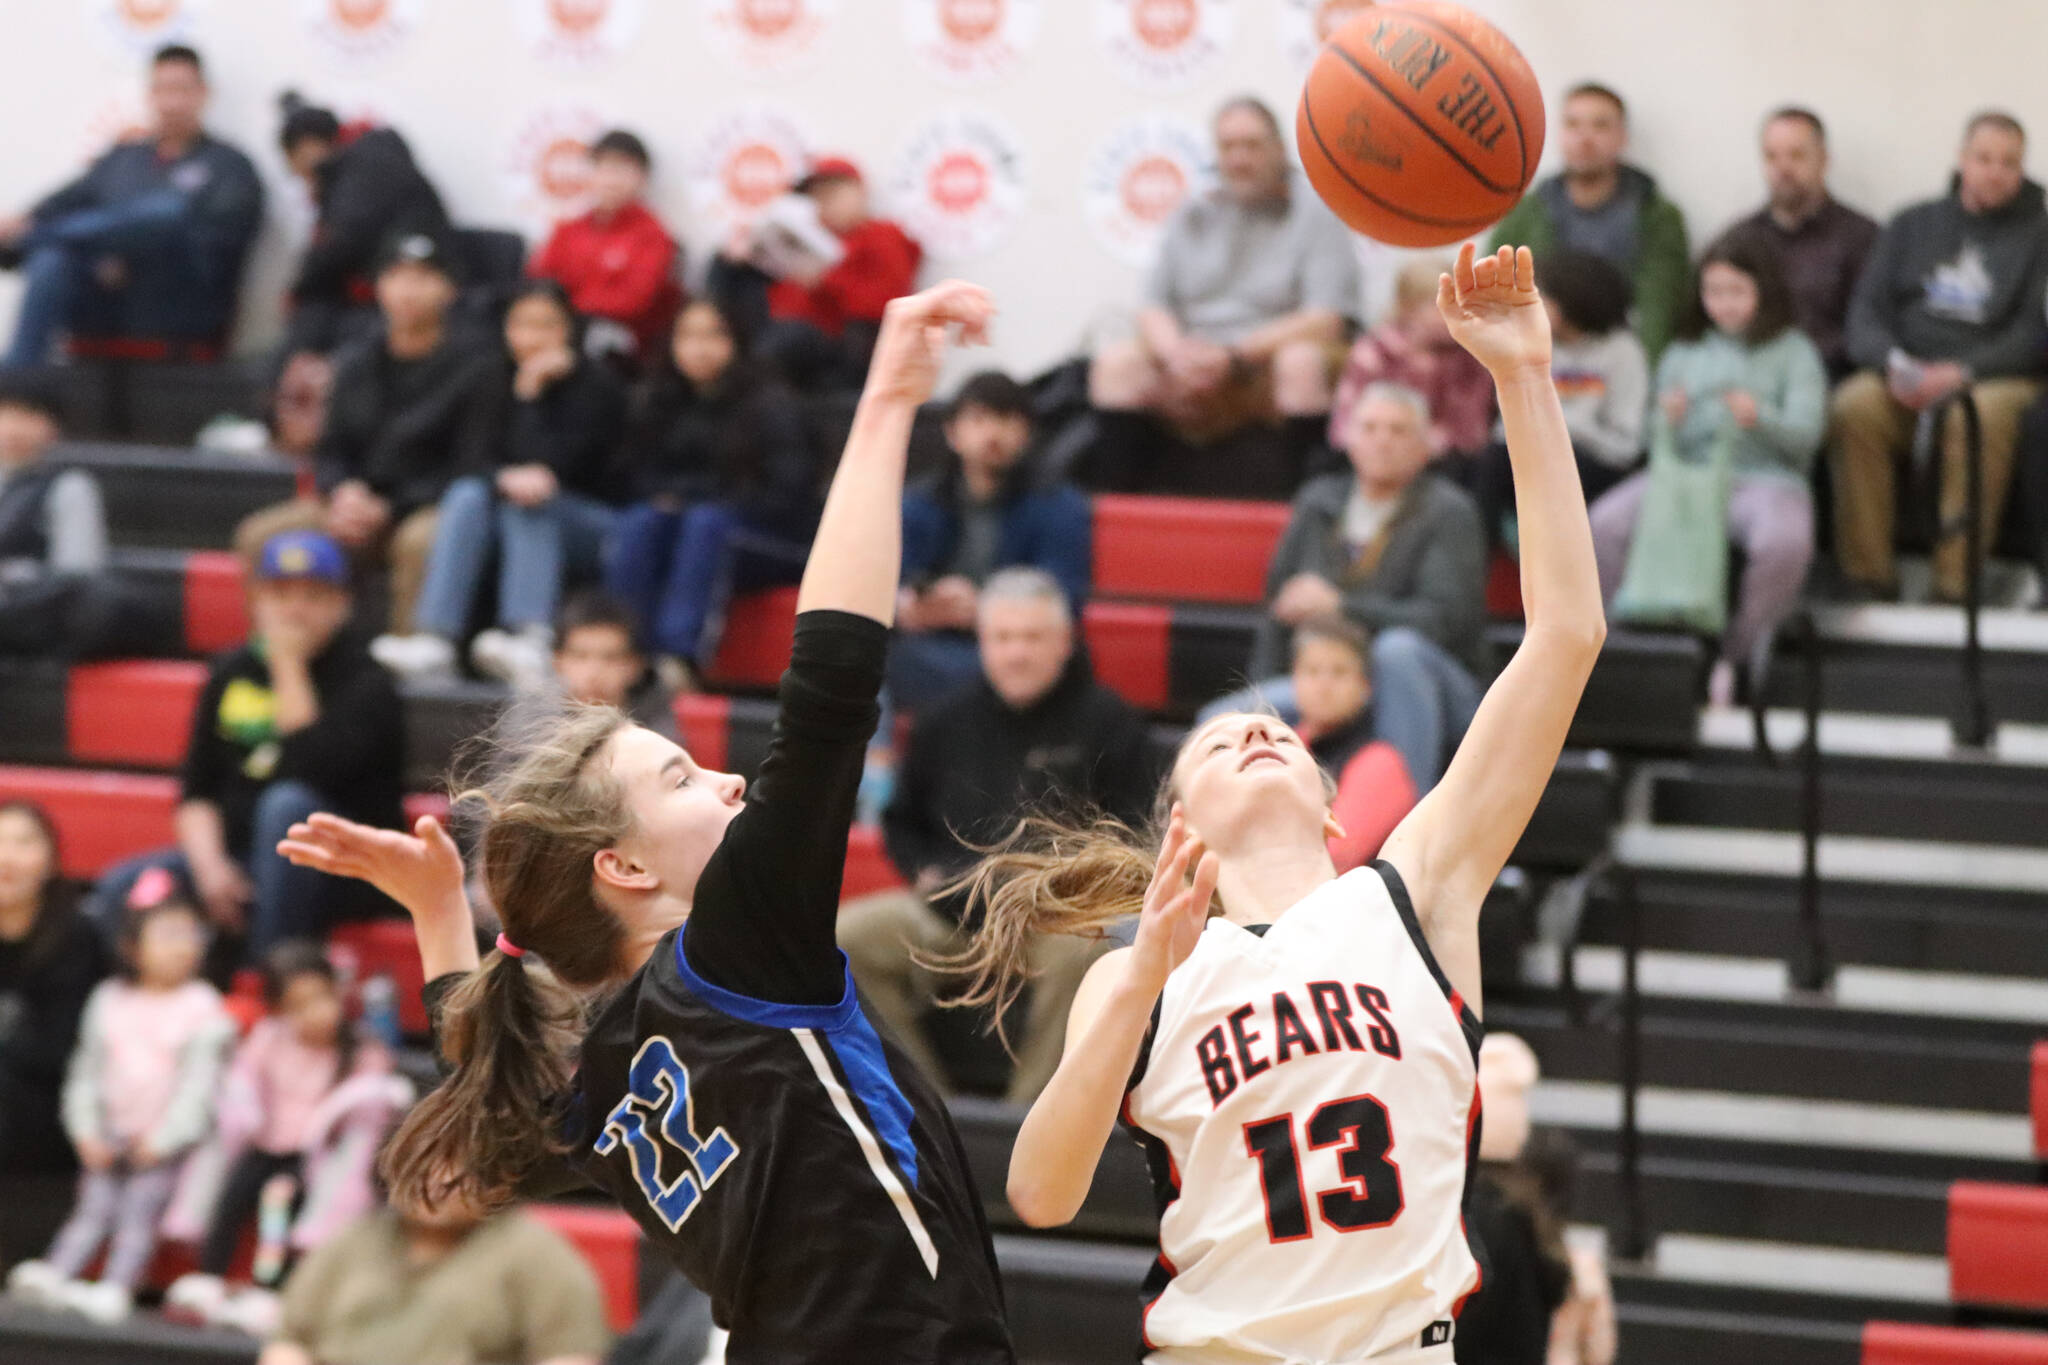 Skylar Tuckwood shoots an easy shot against TMHS on Thursday, March 2, during the Region V tournament at JDHS. Tuckwood finished the game with a total of 12 points. (Jonson Kuhn / Juneau Empire file )